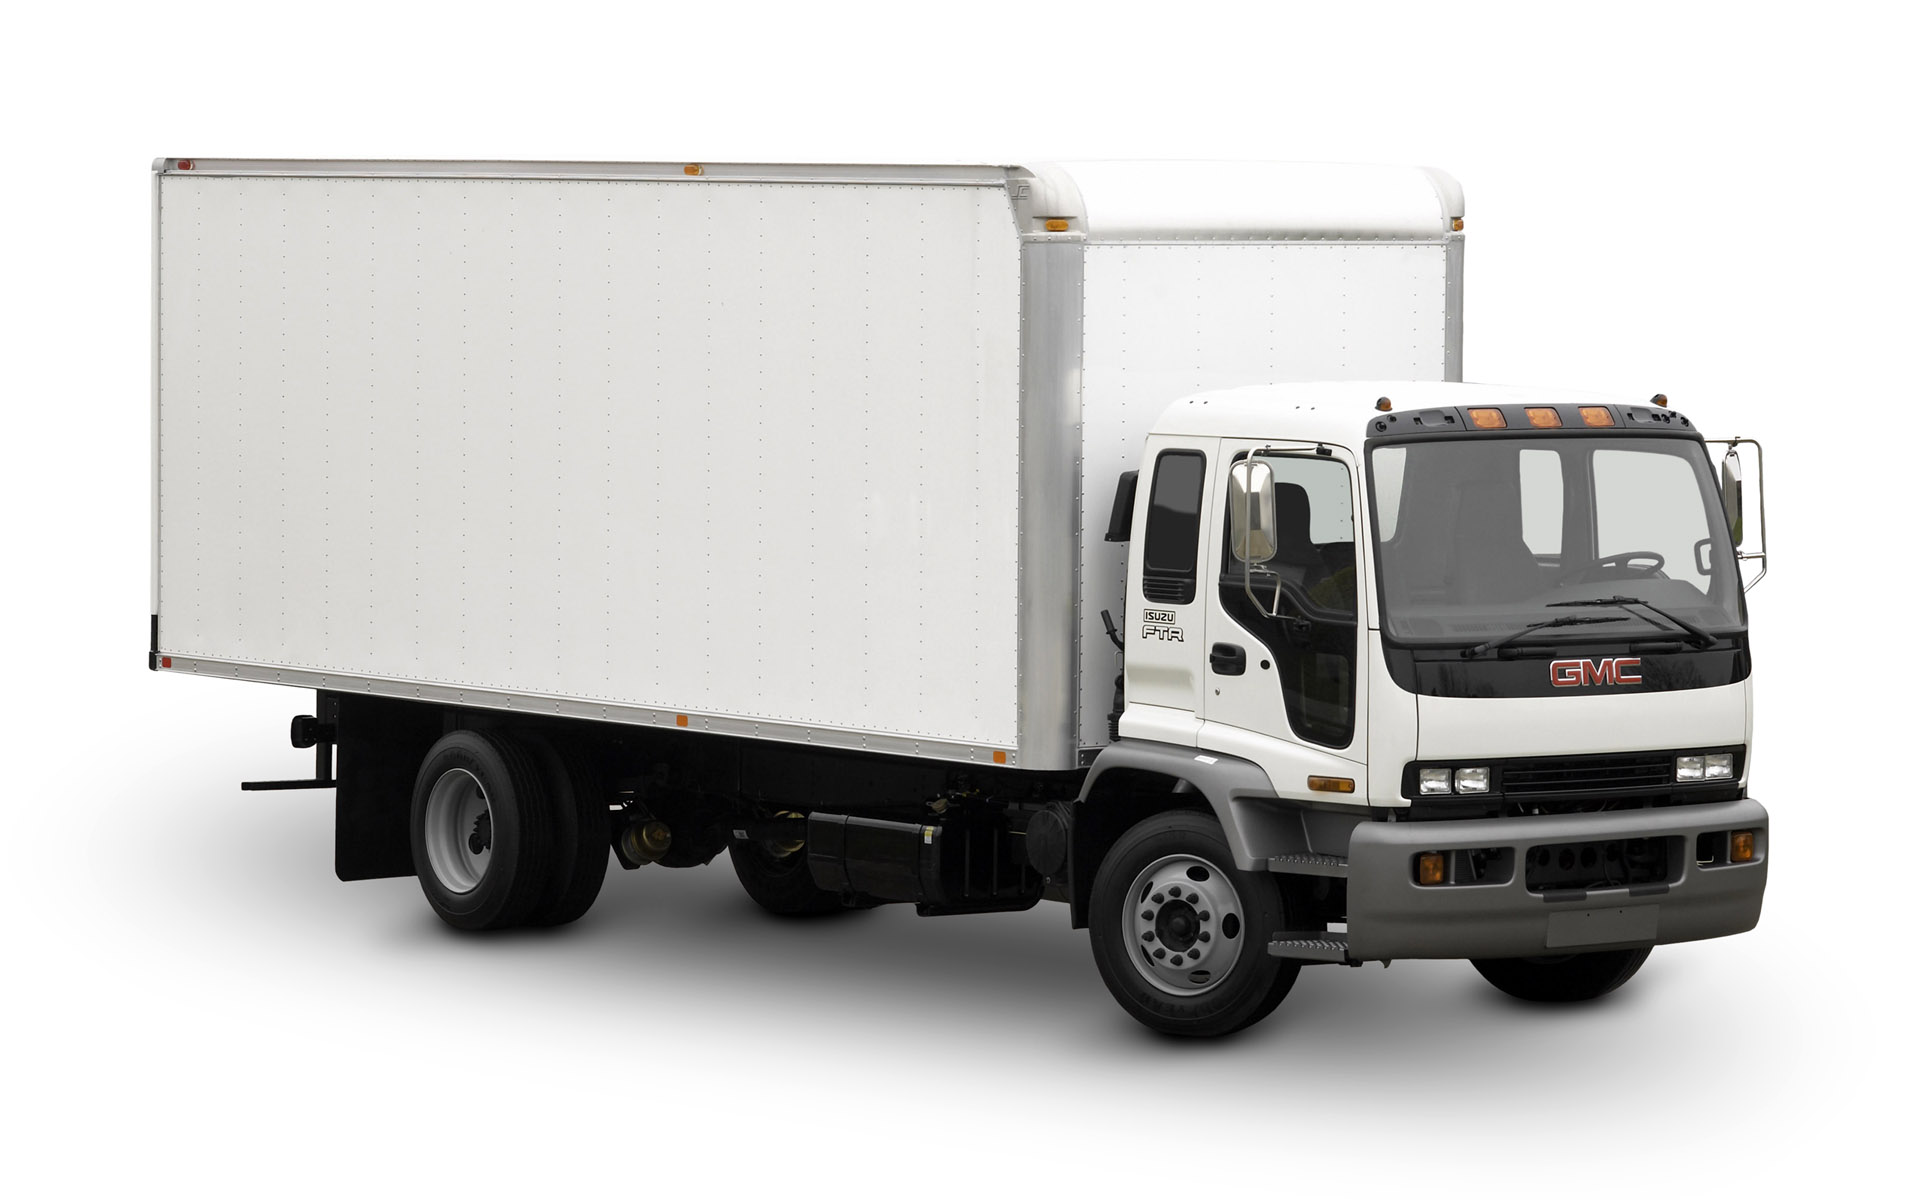 Truck White Background Images | All White Background